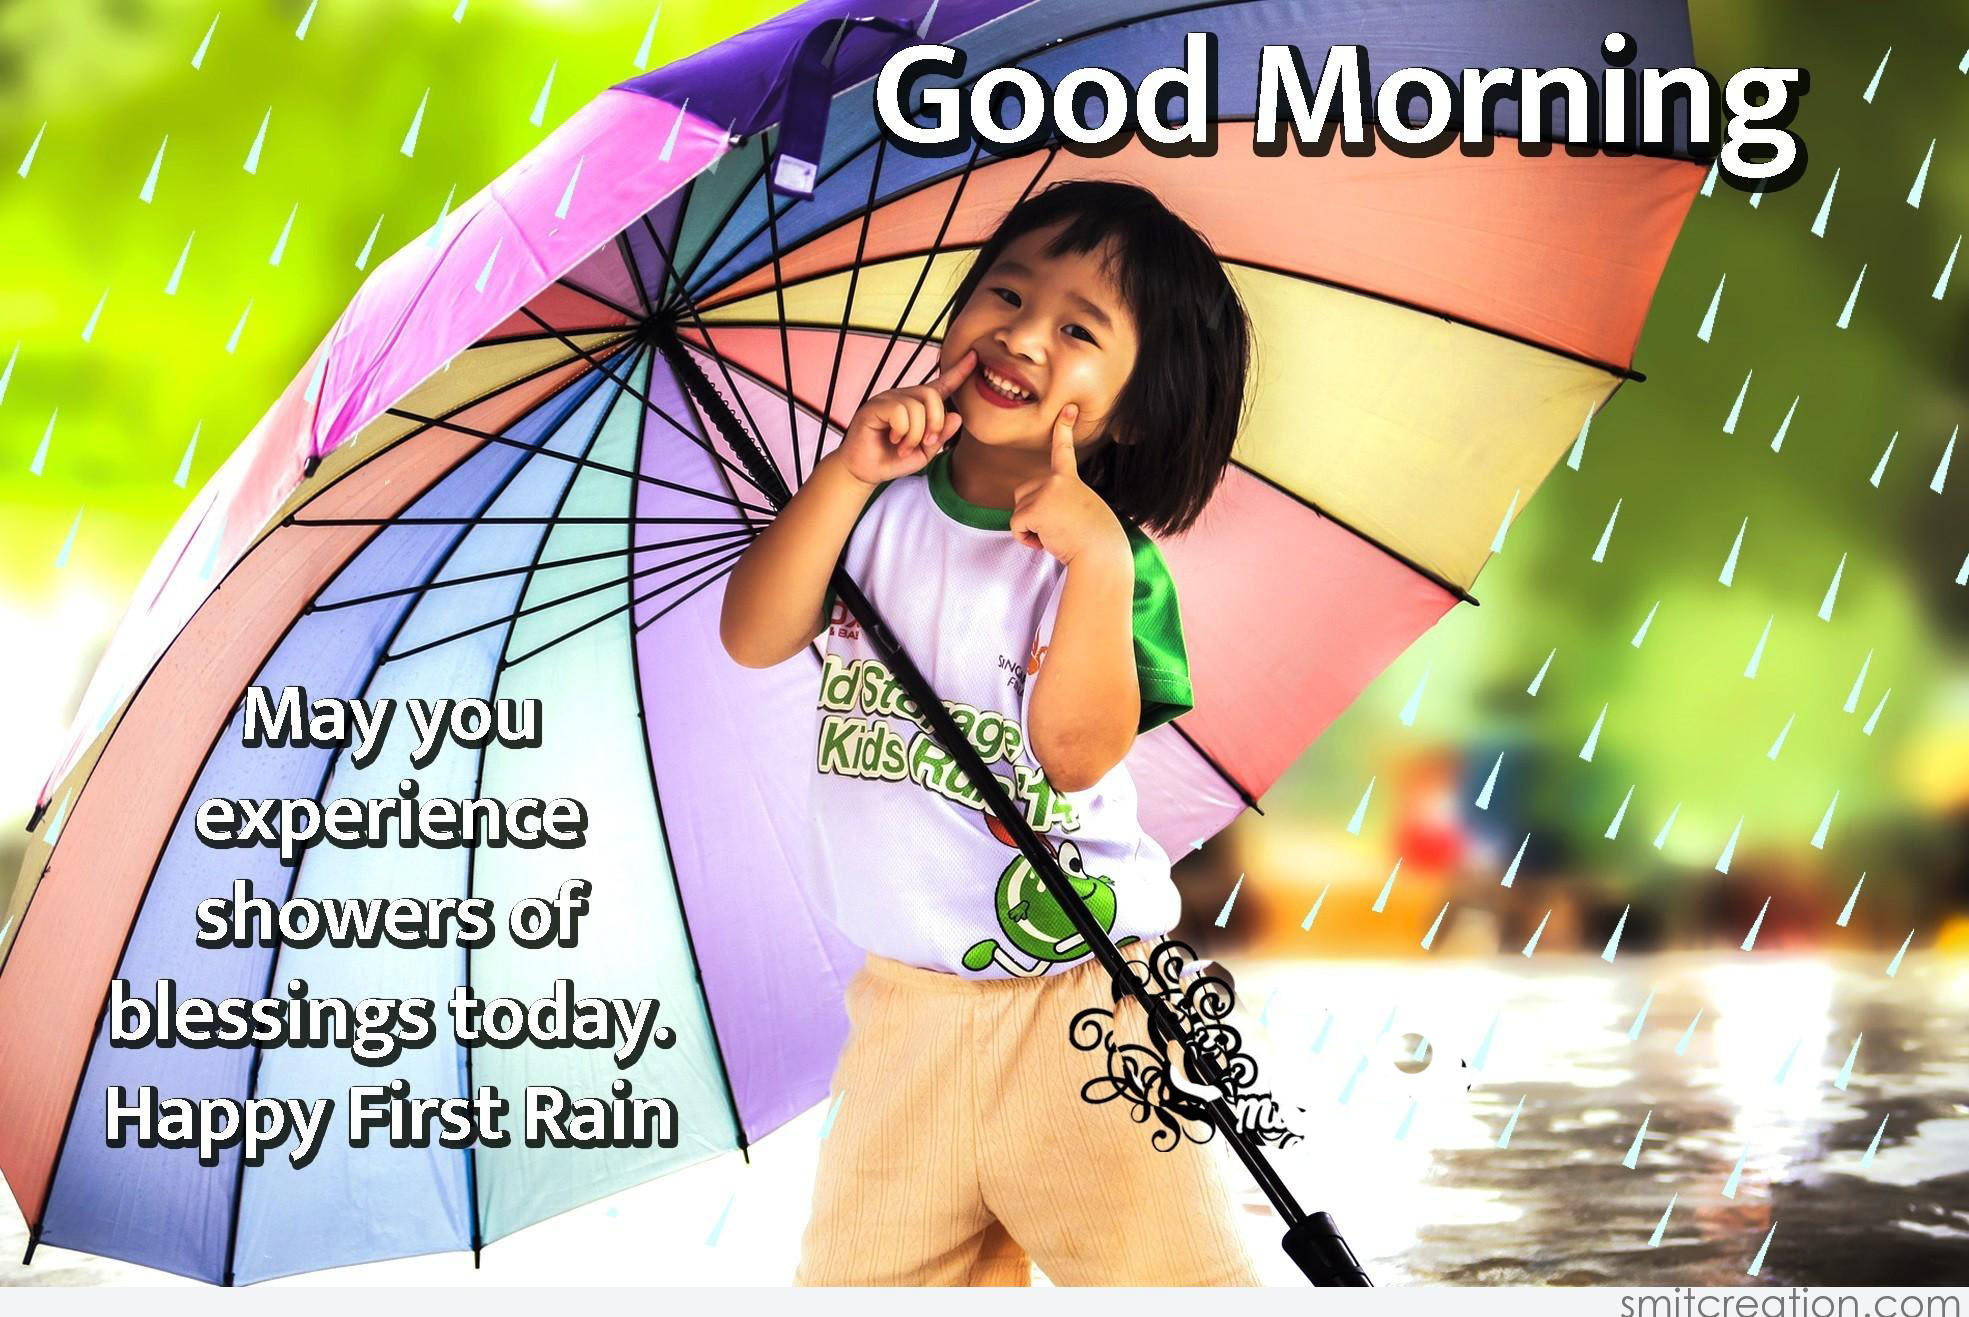 Perfect Good Morning Wishes For A Rainy Day 24